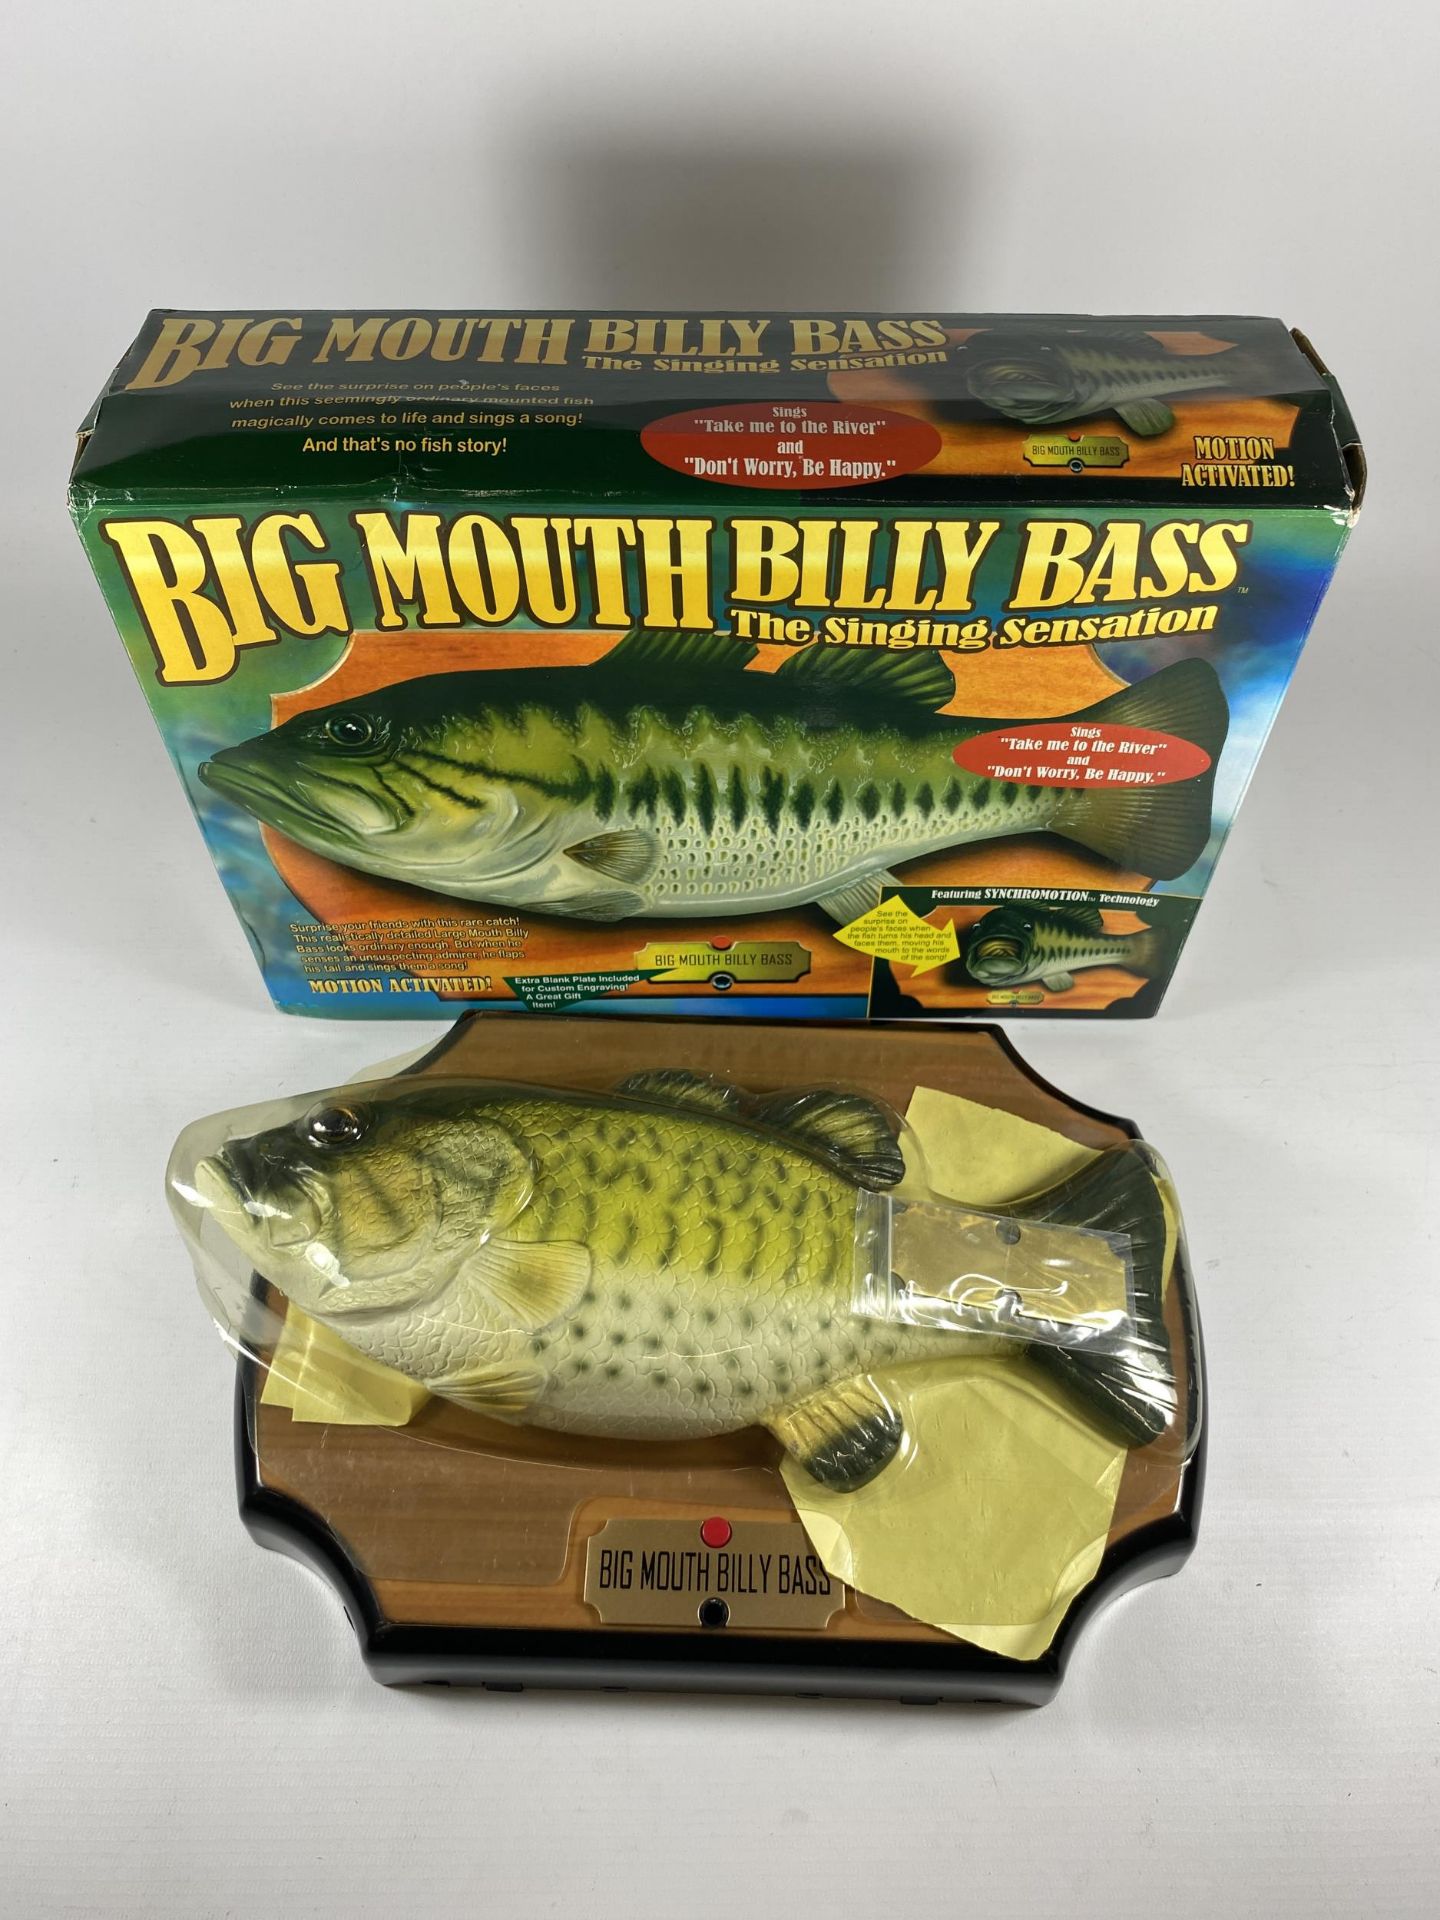 A BOXED RETRO BIG MOUTH BILLY BASS THE SINGING SENSATION - Image 3 of 3